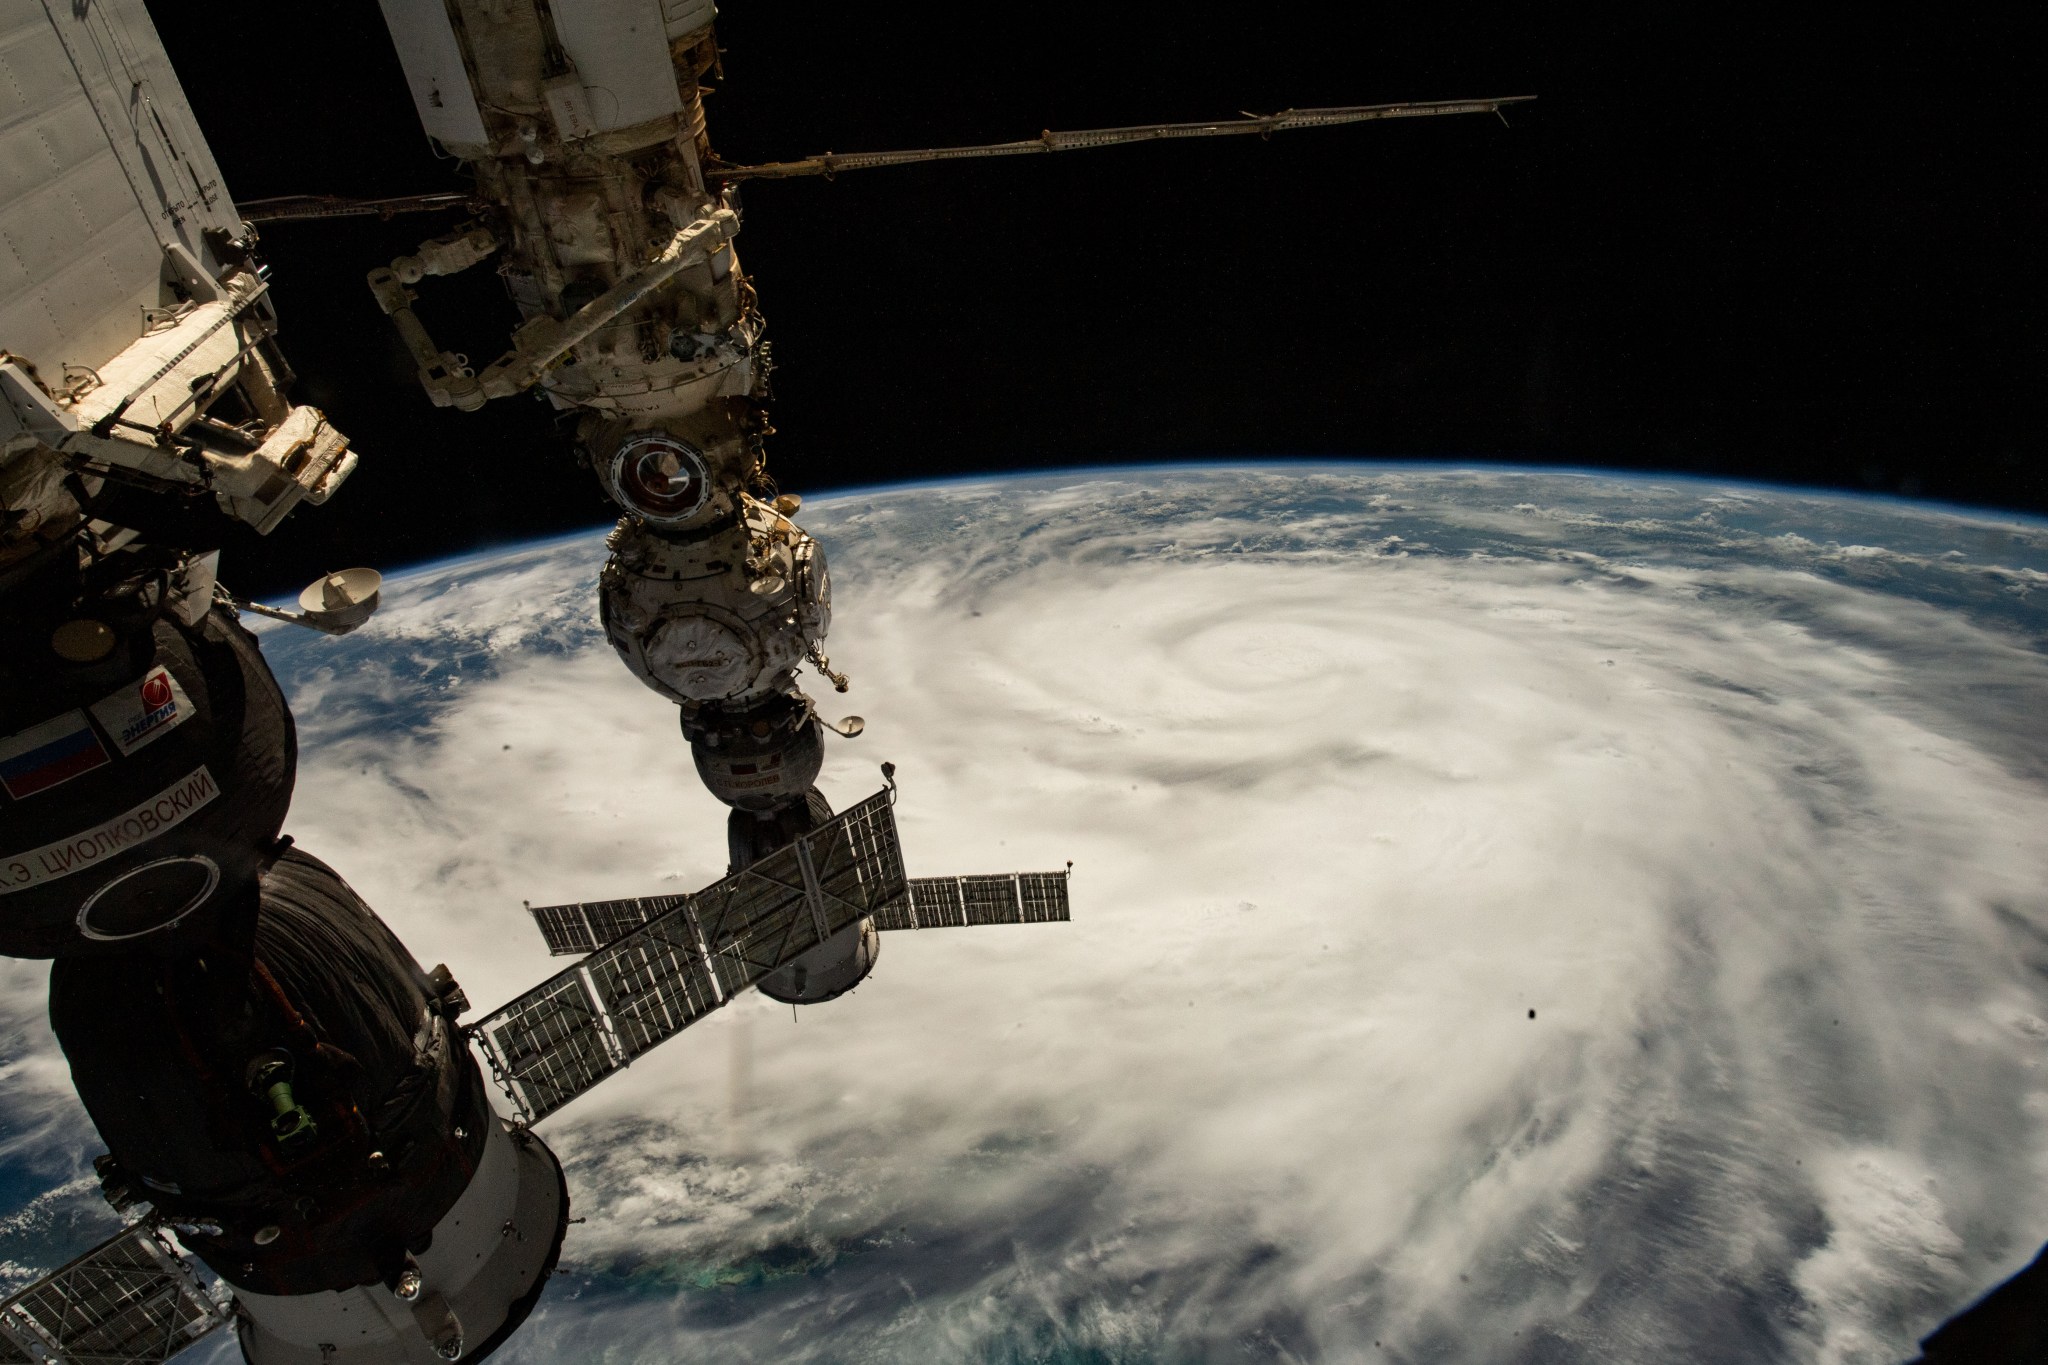 Hurricane Ian is pictured from the International Space Station